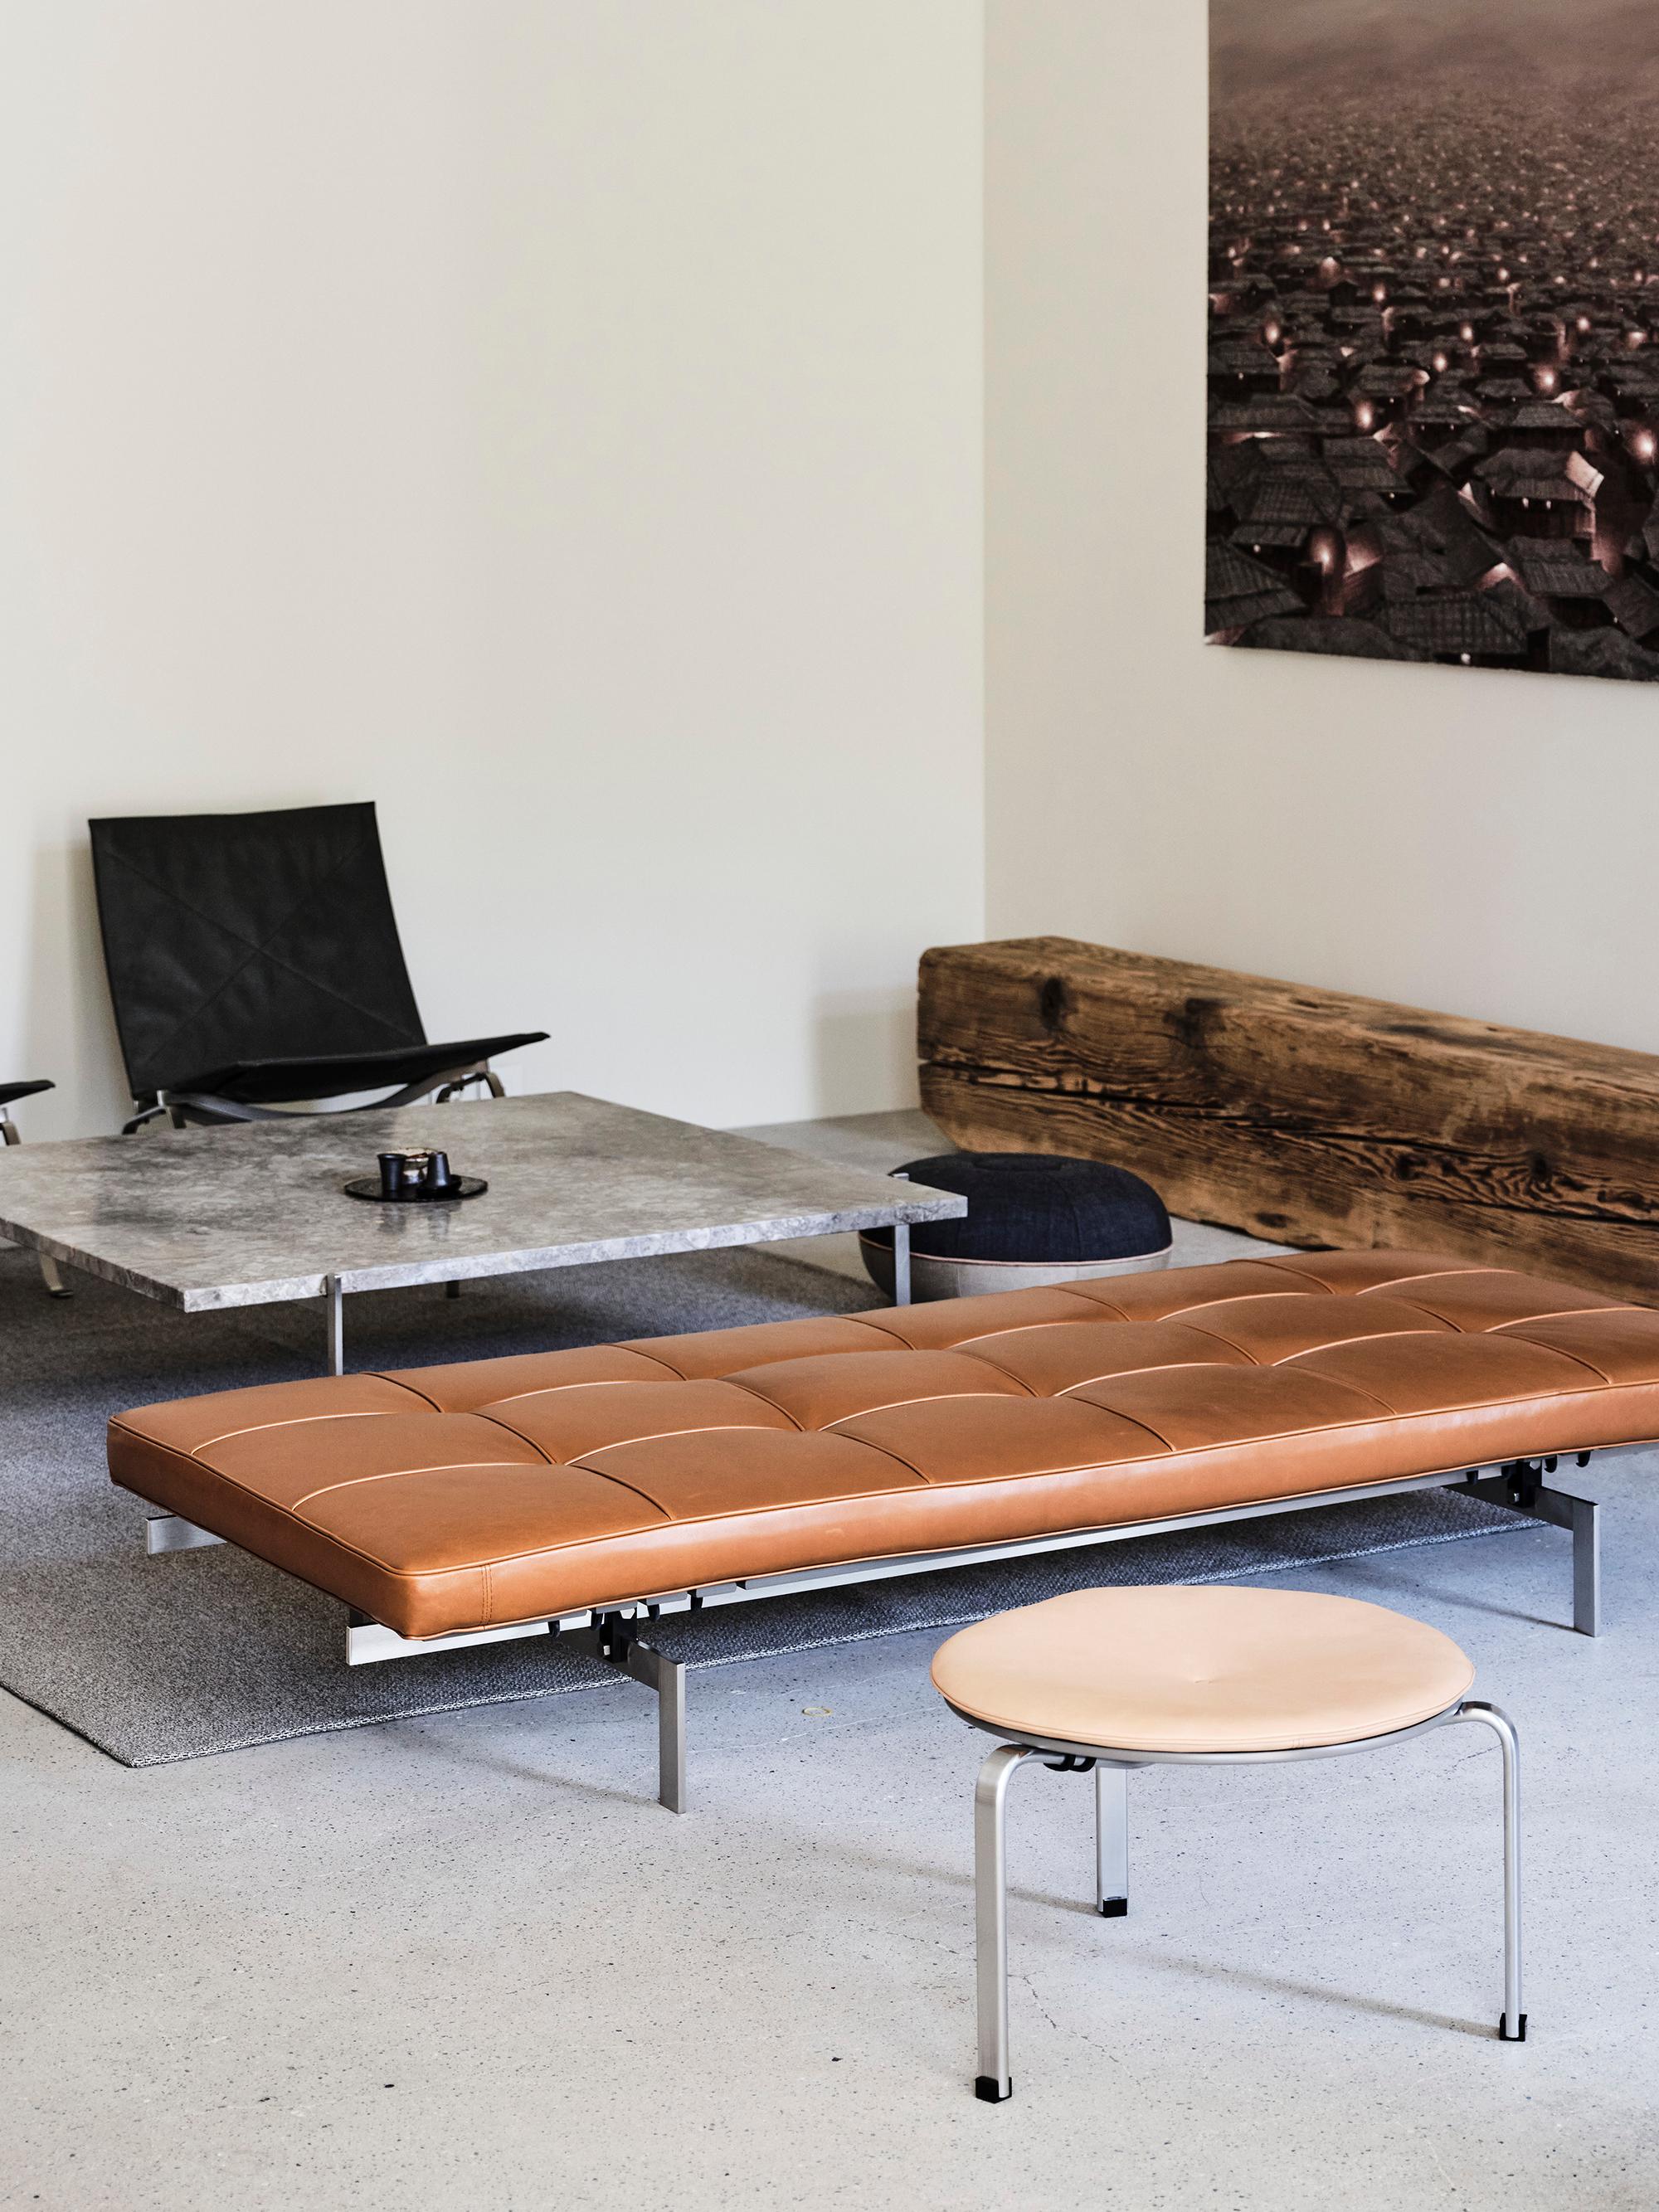 Poul Kjærholm 'PK80' Daybed for Fritz Hansen in Leather (Cat. 5)

Established in 1872, Fritz Hansen has become synonymous with legendary Danish design. Combining timeless craftsmanship with an emphasis on sustainability, the brand’s re-editions of